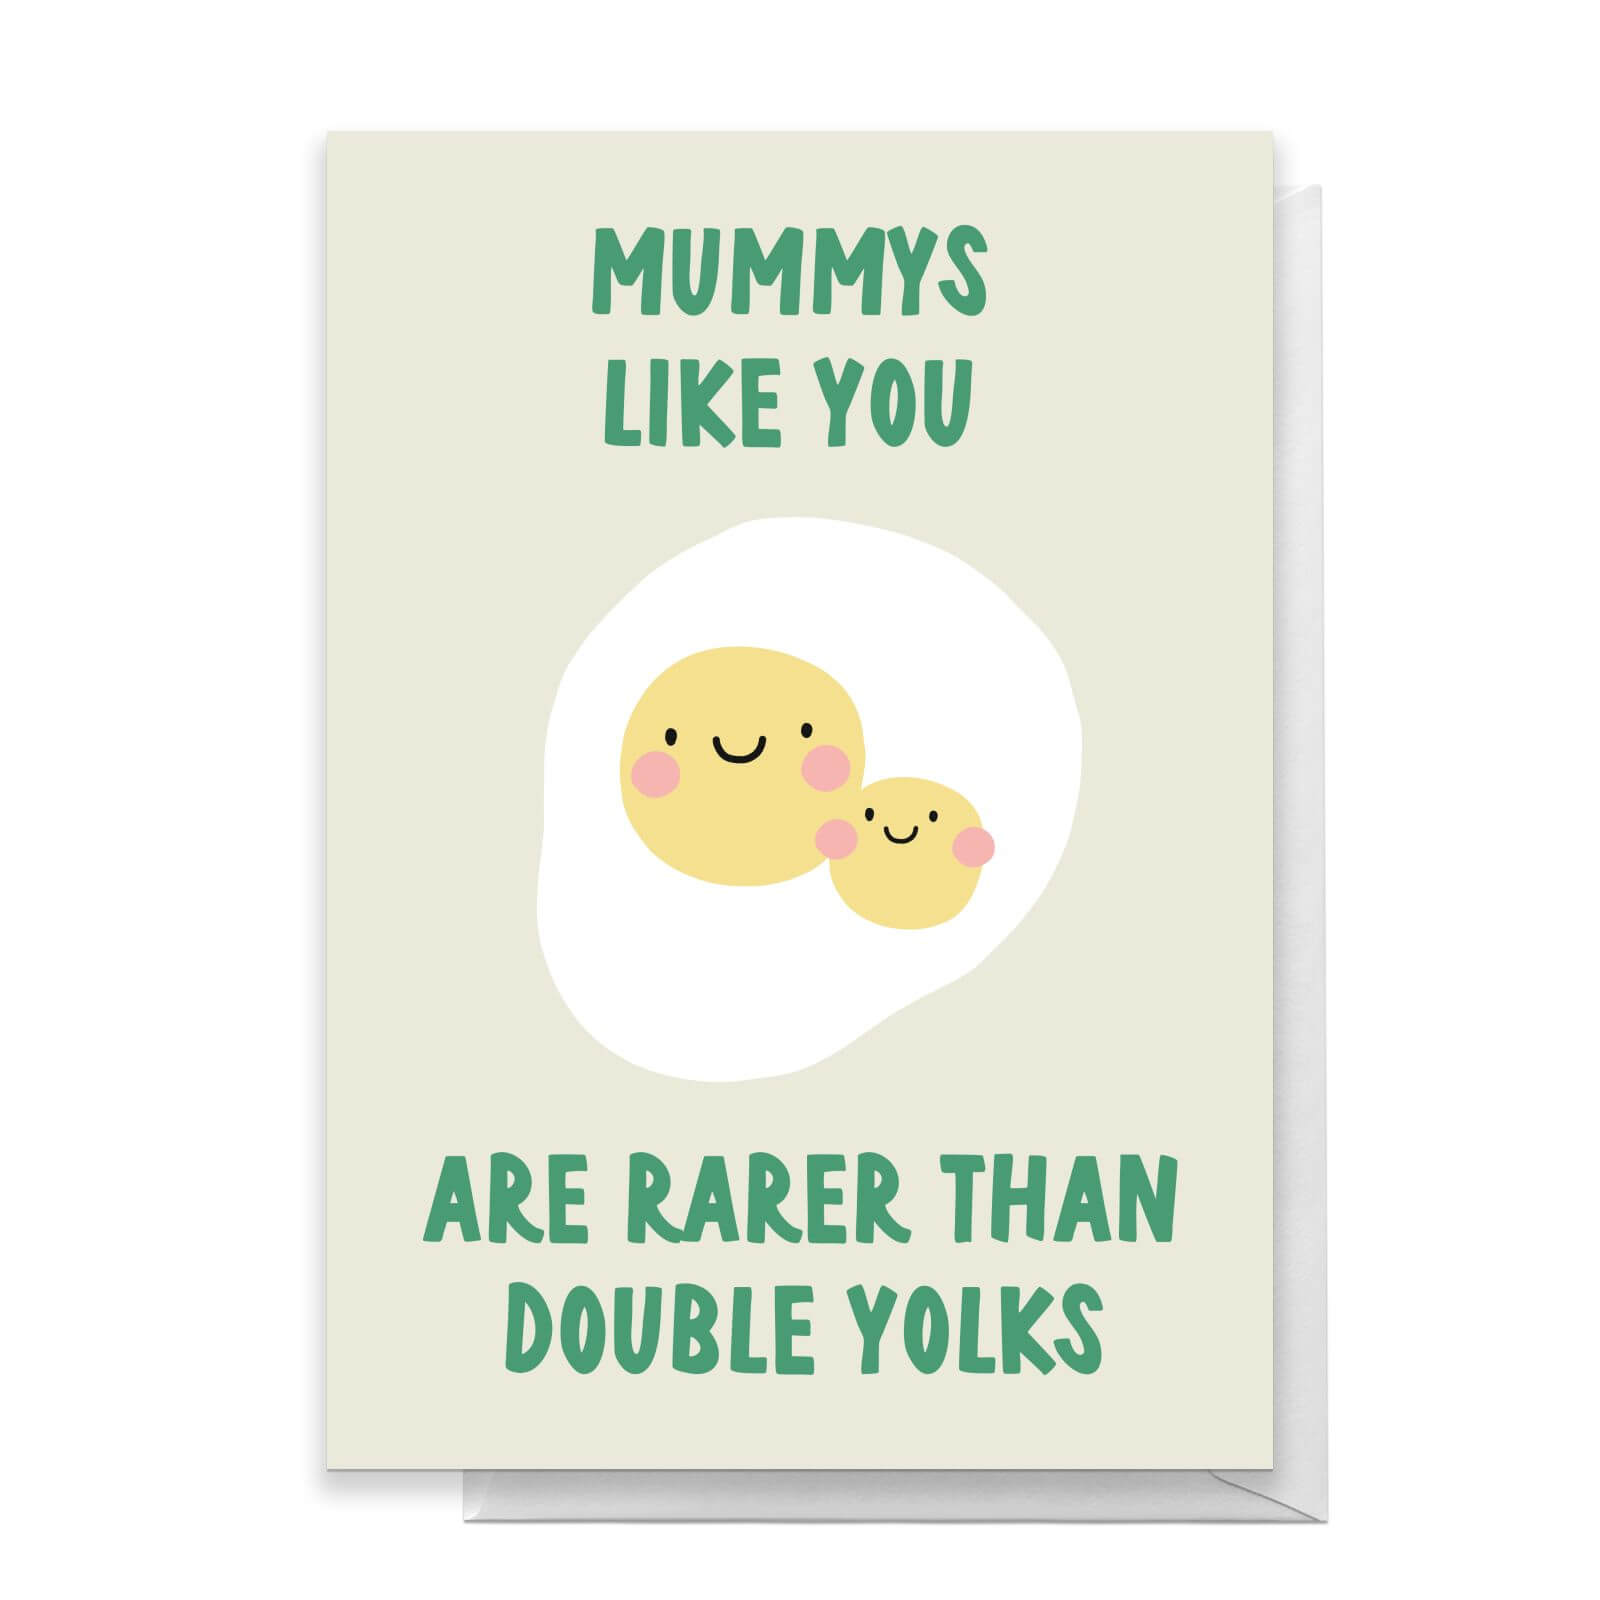 Mummys Like You Are Rarer Than Double Yolks Greetings Card - Standard Card